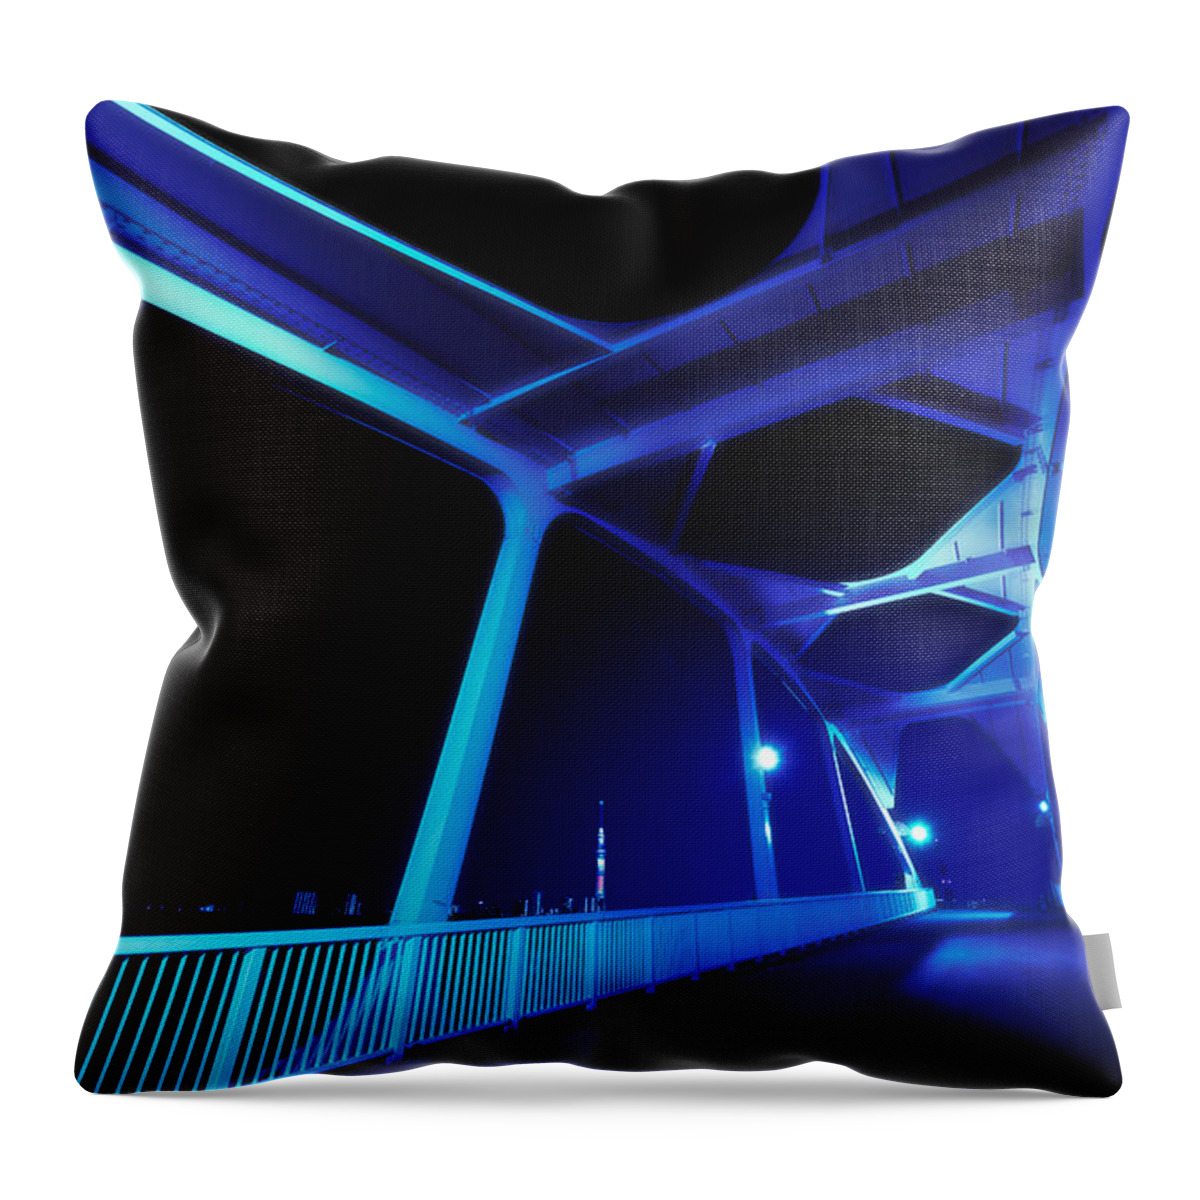 Tranquility Throw Pillow featuring the photograph Tokyo Bridge by Ikataro